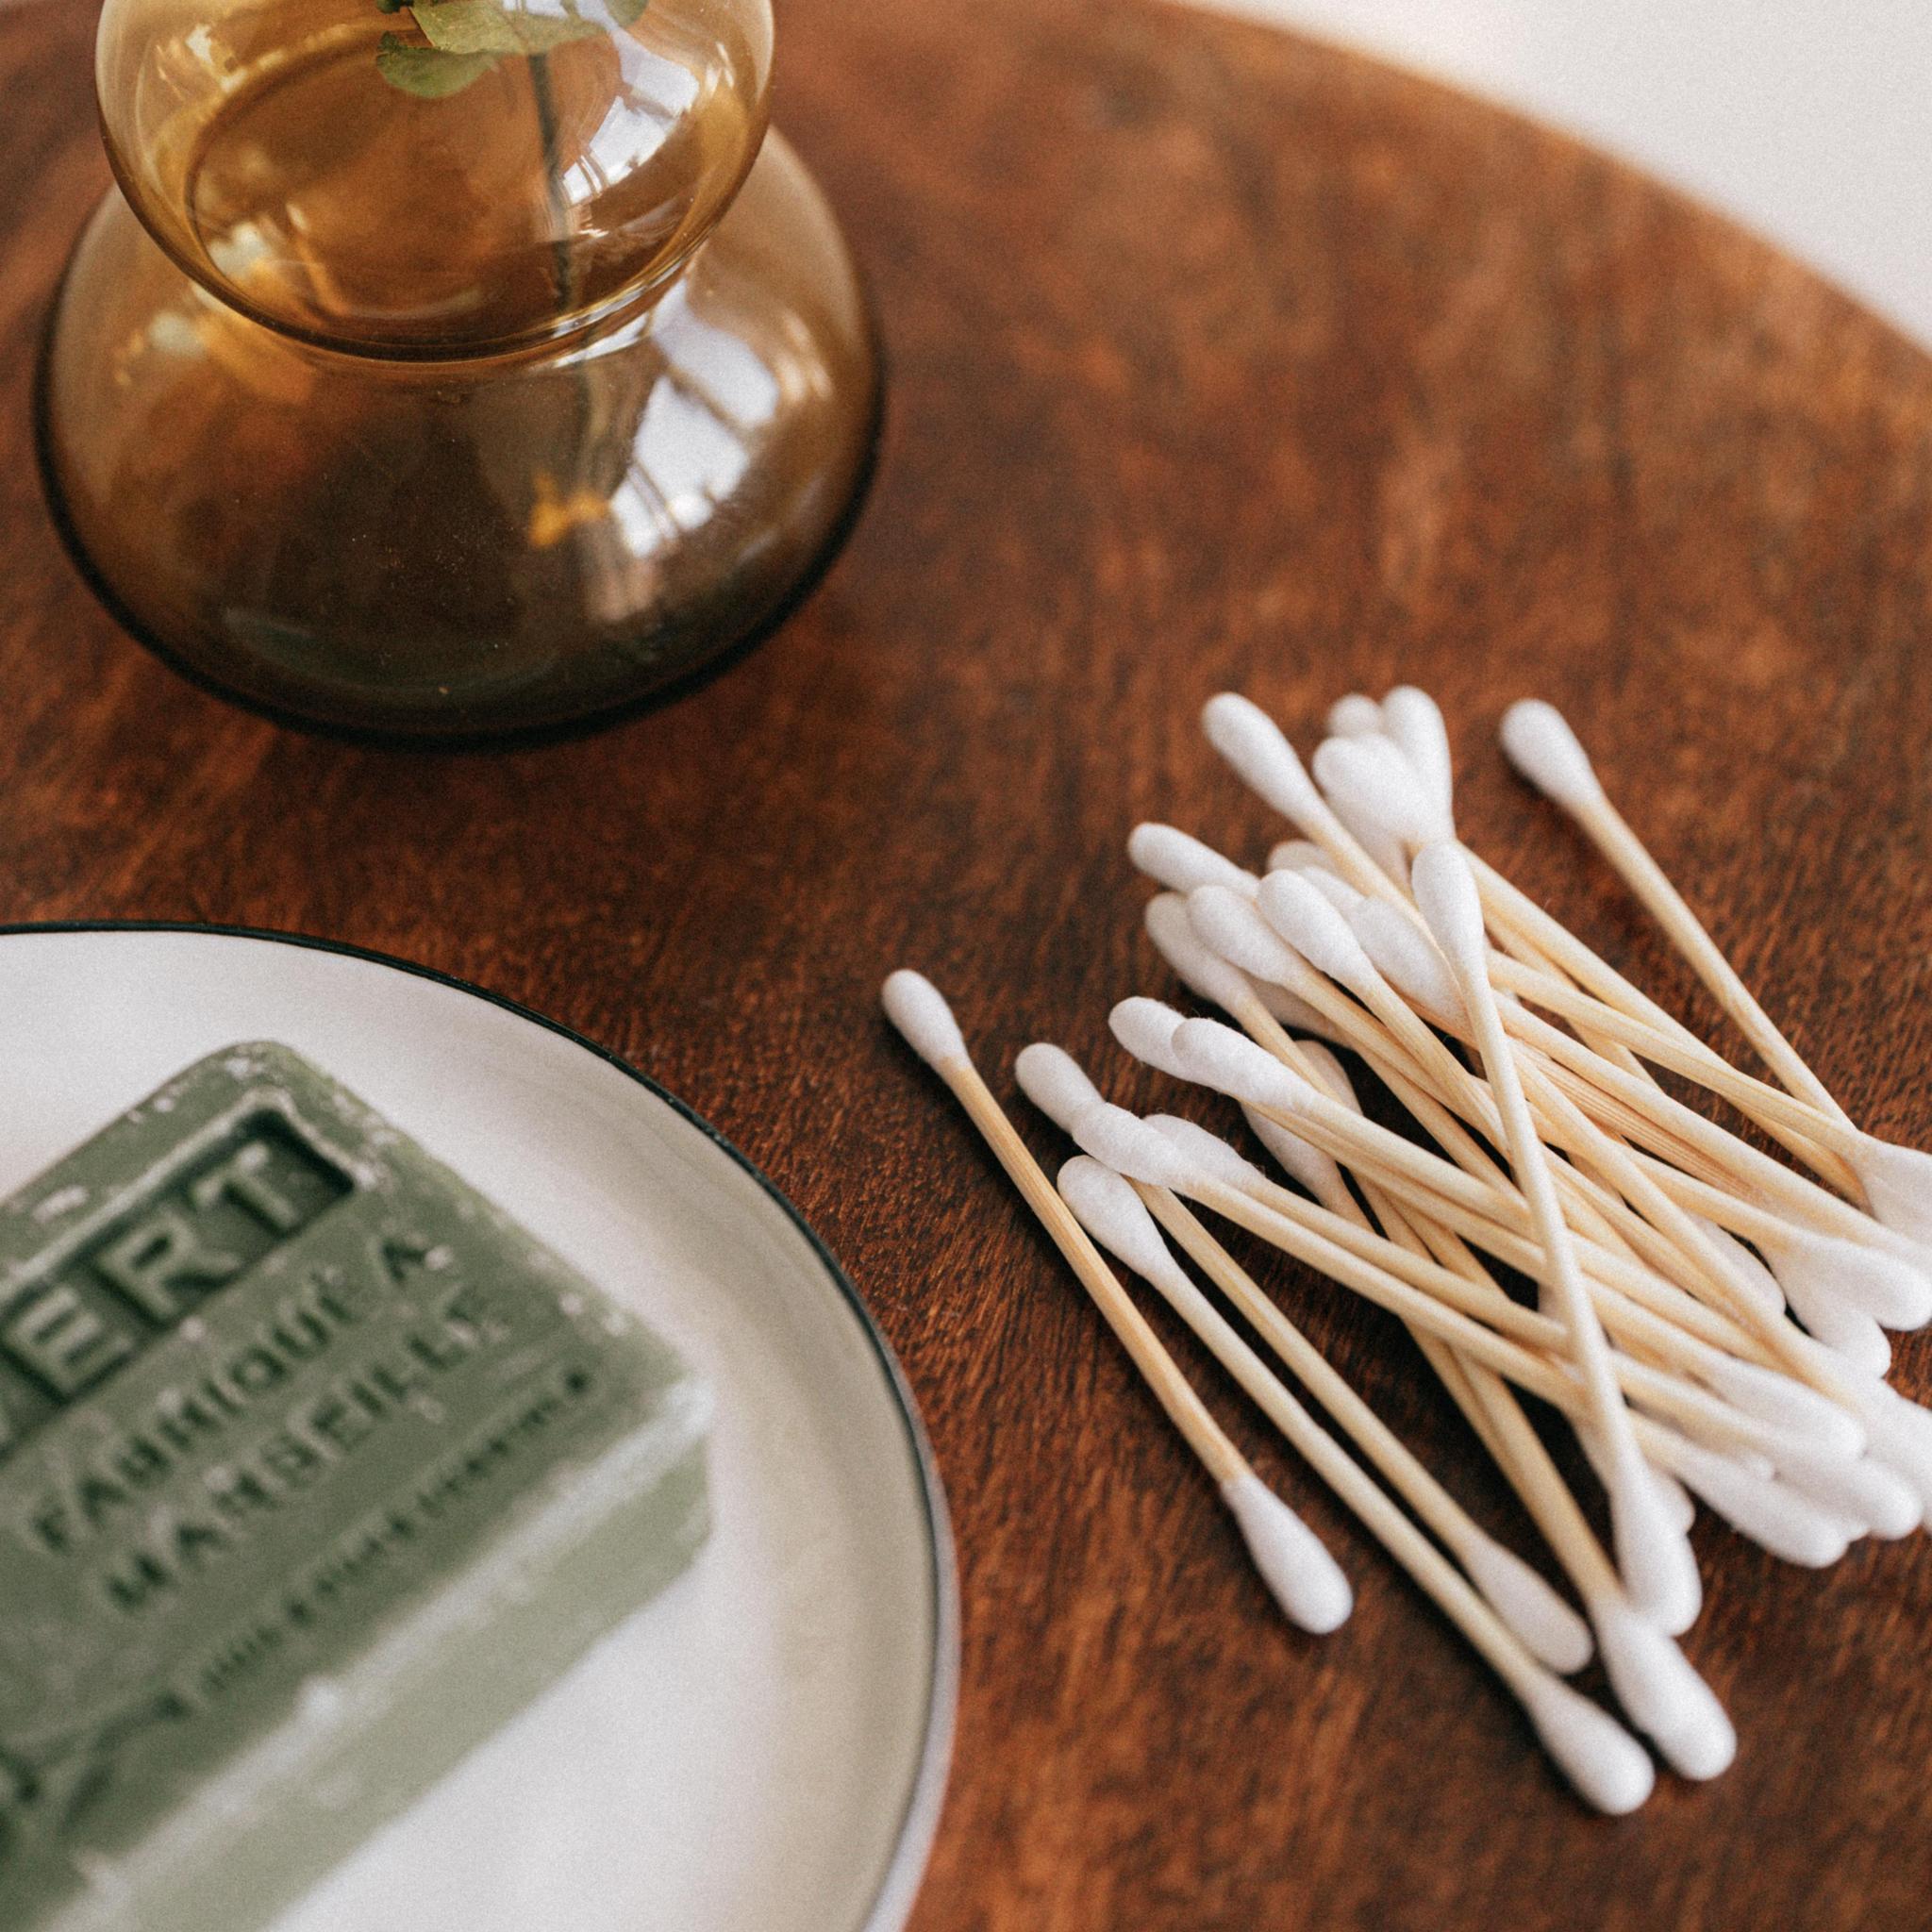 Earths Tribe | Bamboo Cotton Buds | 200 Pieces